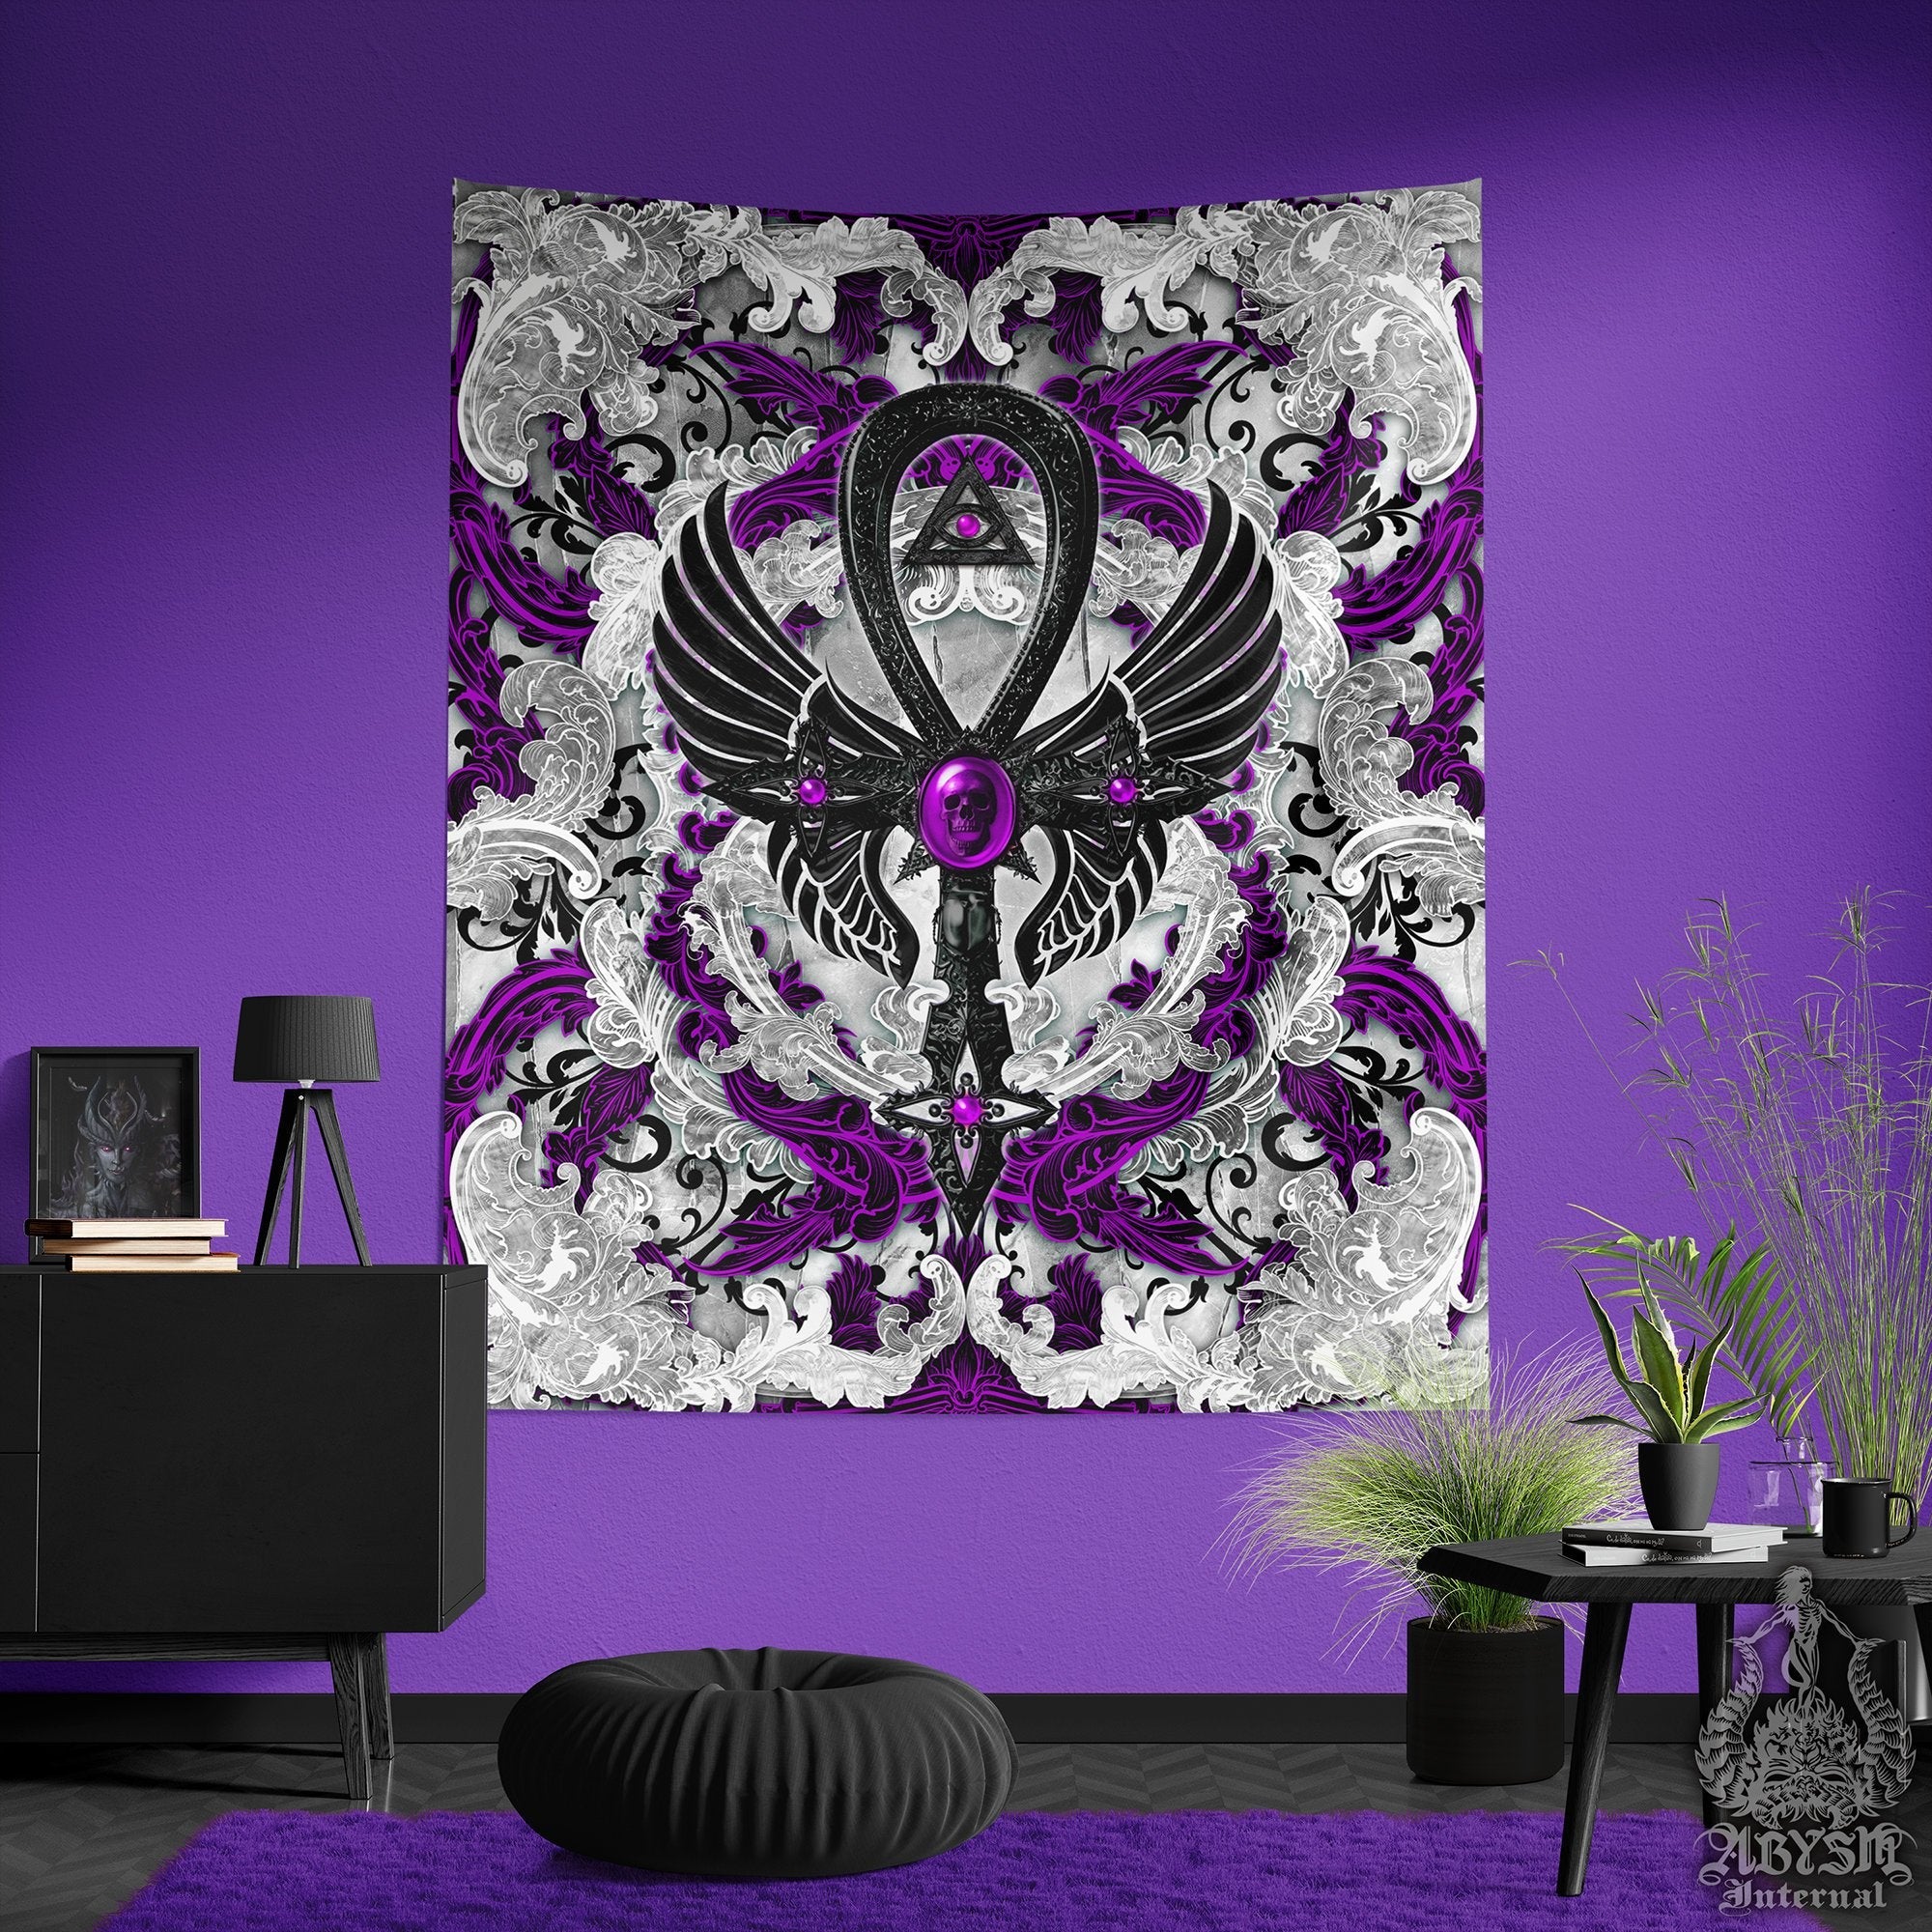 Pastel Goth Tapestry, Gothic Wall Hanging, Occult Home Decor, Art Print - Ankh Cross, White - Abysm Internal